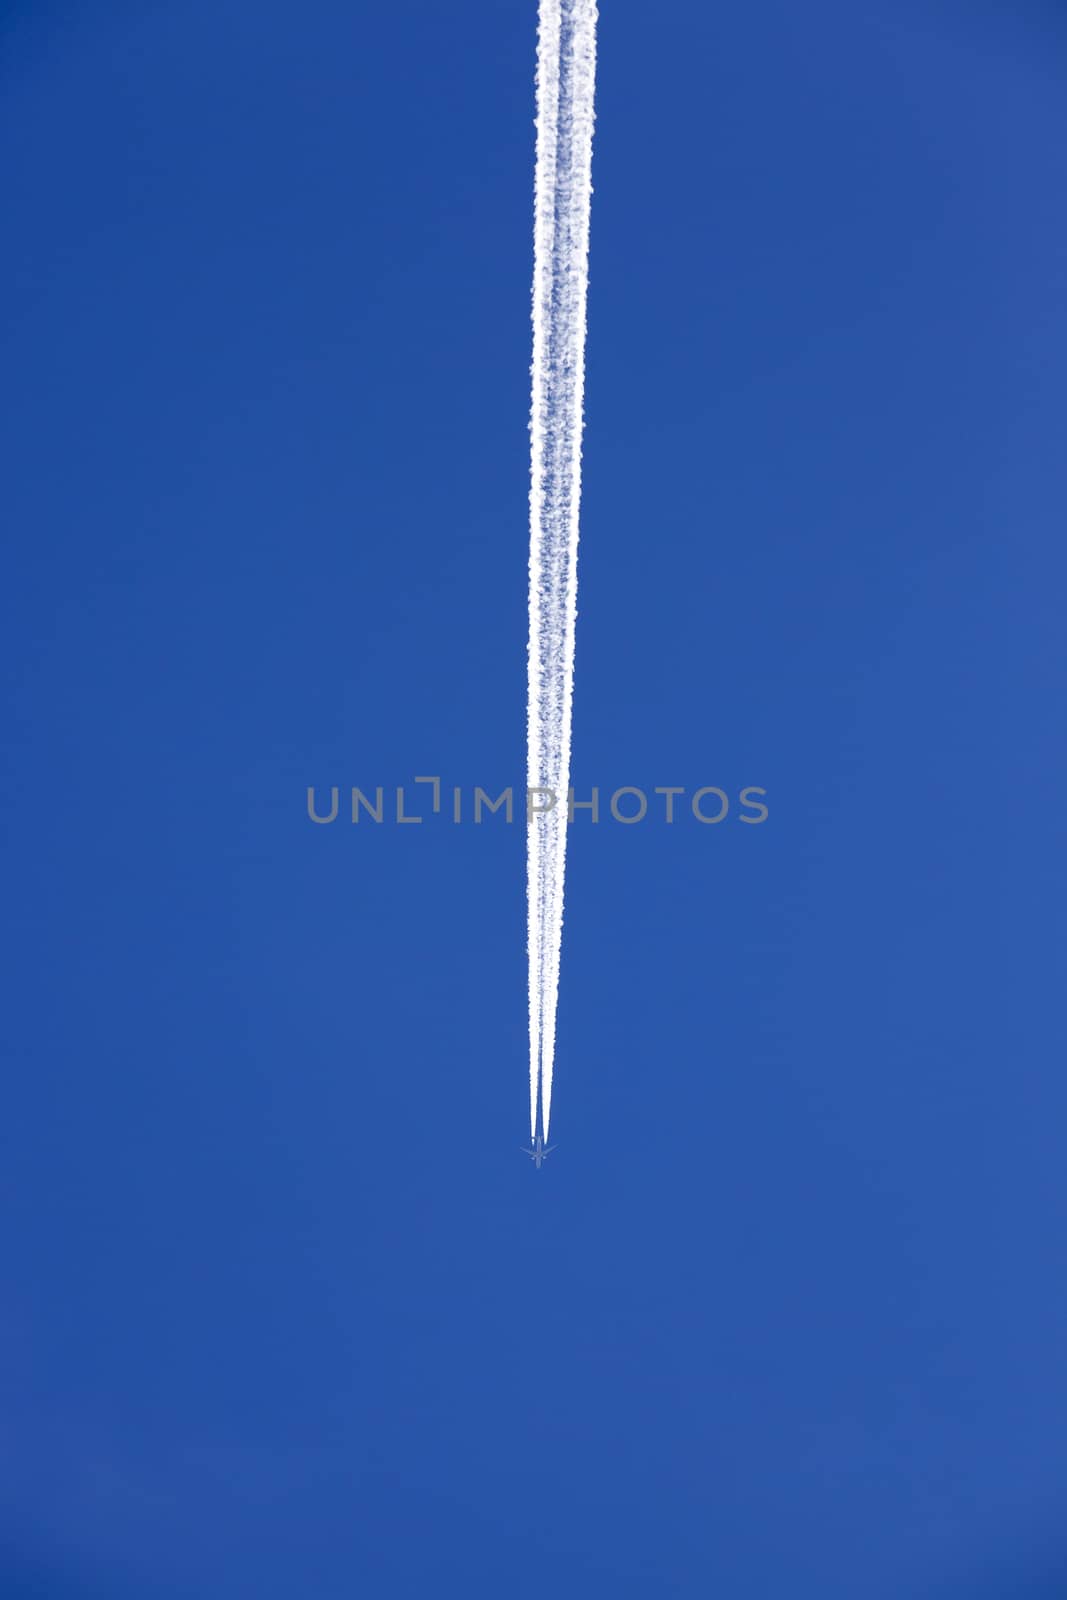  photographed the aircraft during flight in the blue sky